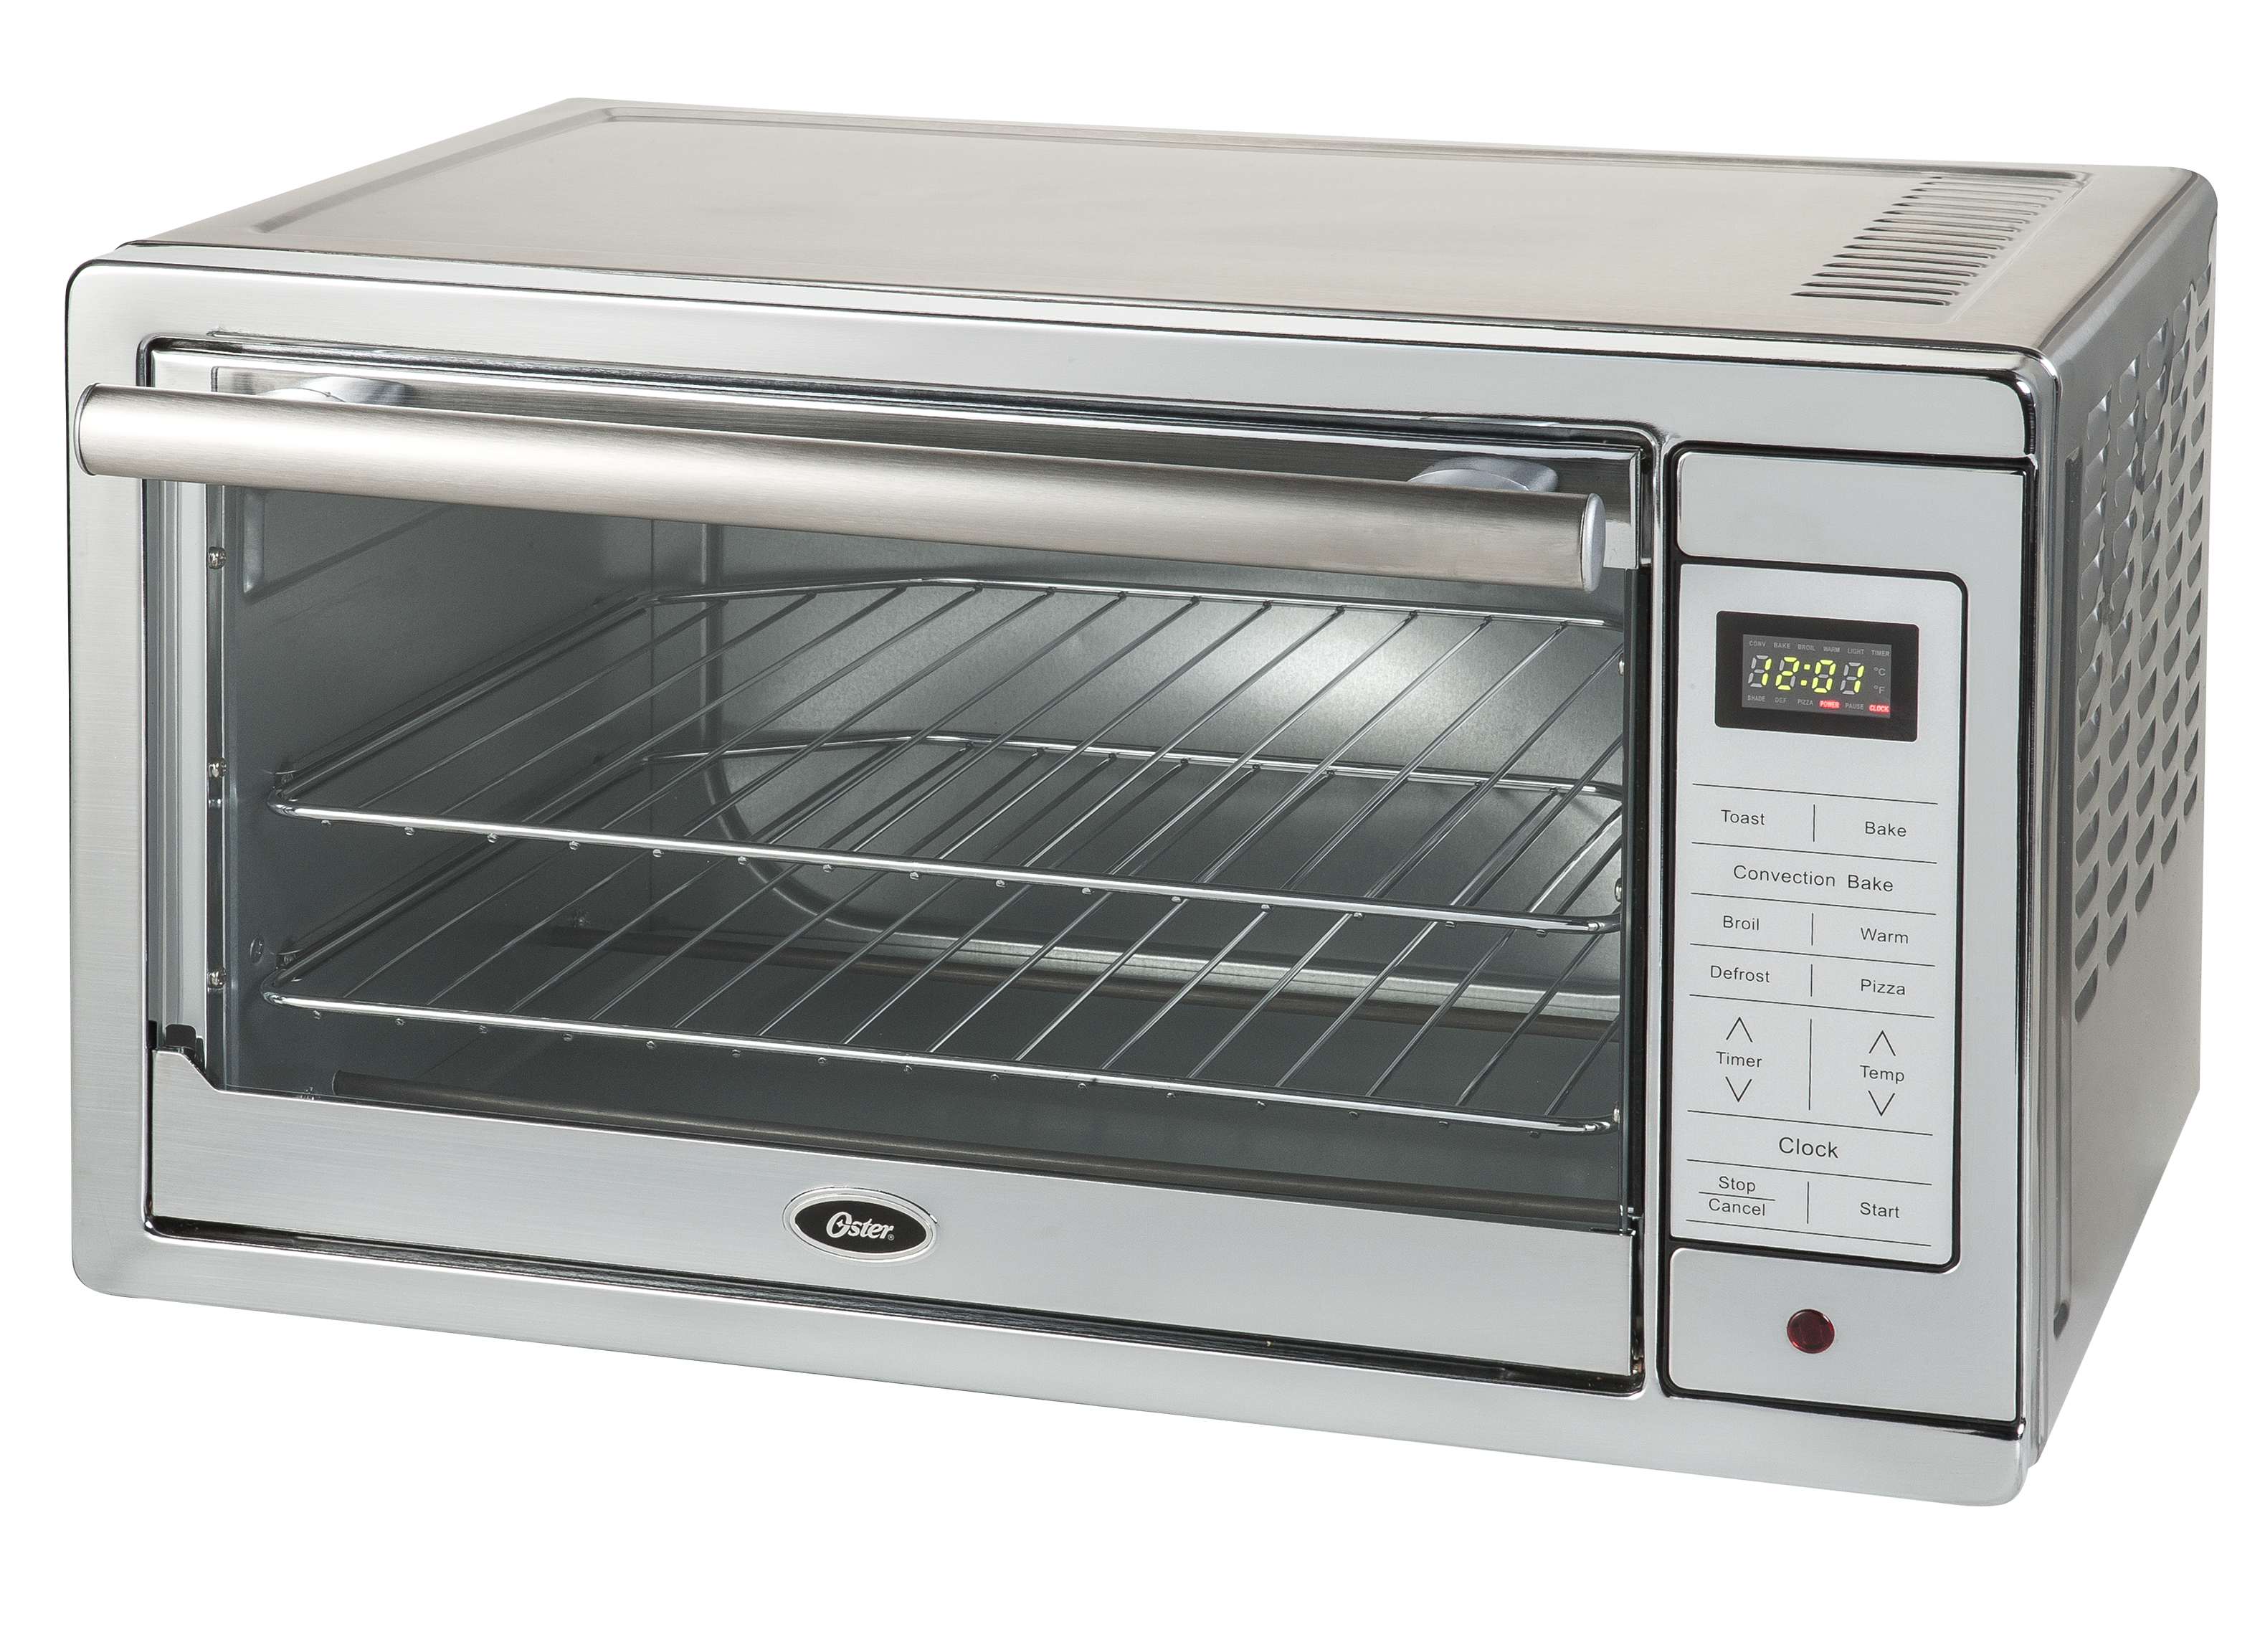 https://crdms.images.consumerreports.org/prod/products/cr/models/285122-toasterovens-oster-xltoasteroventssttvxldg.png